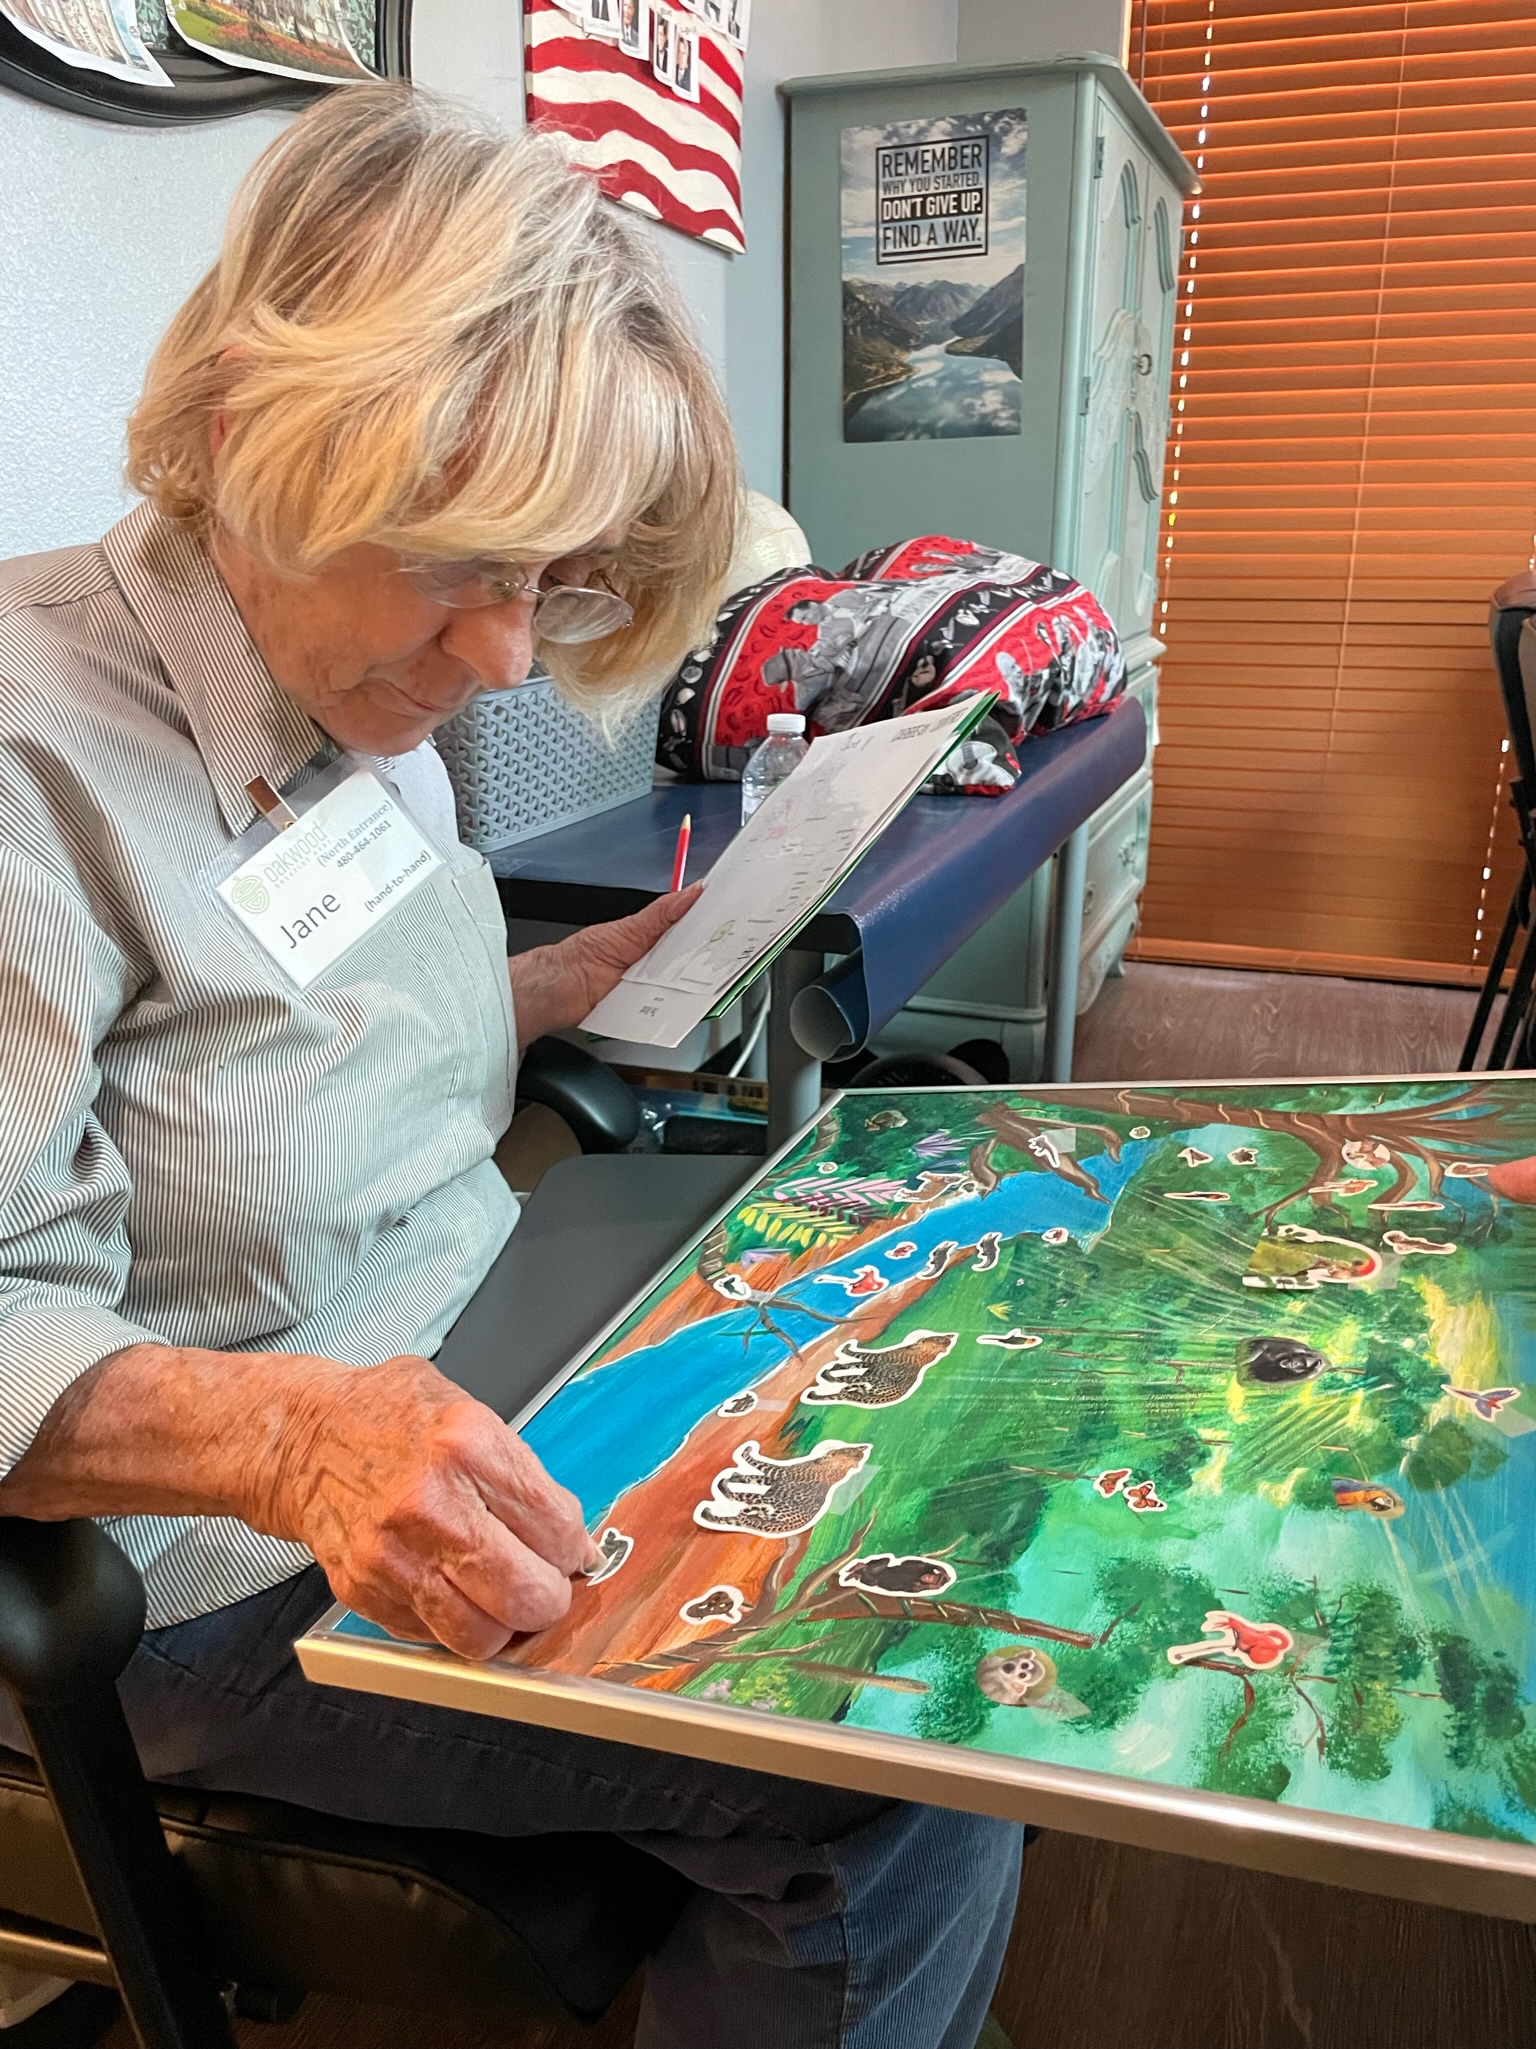 Oakwood's Cognitive Engagement Class For Seniors With Dementia